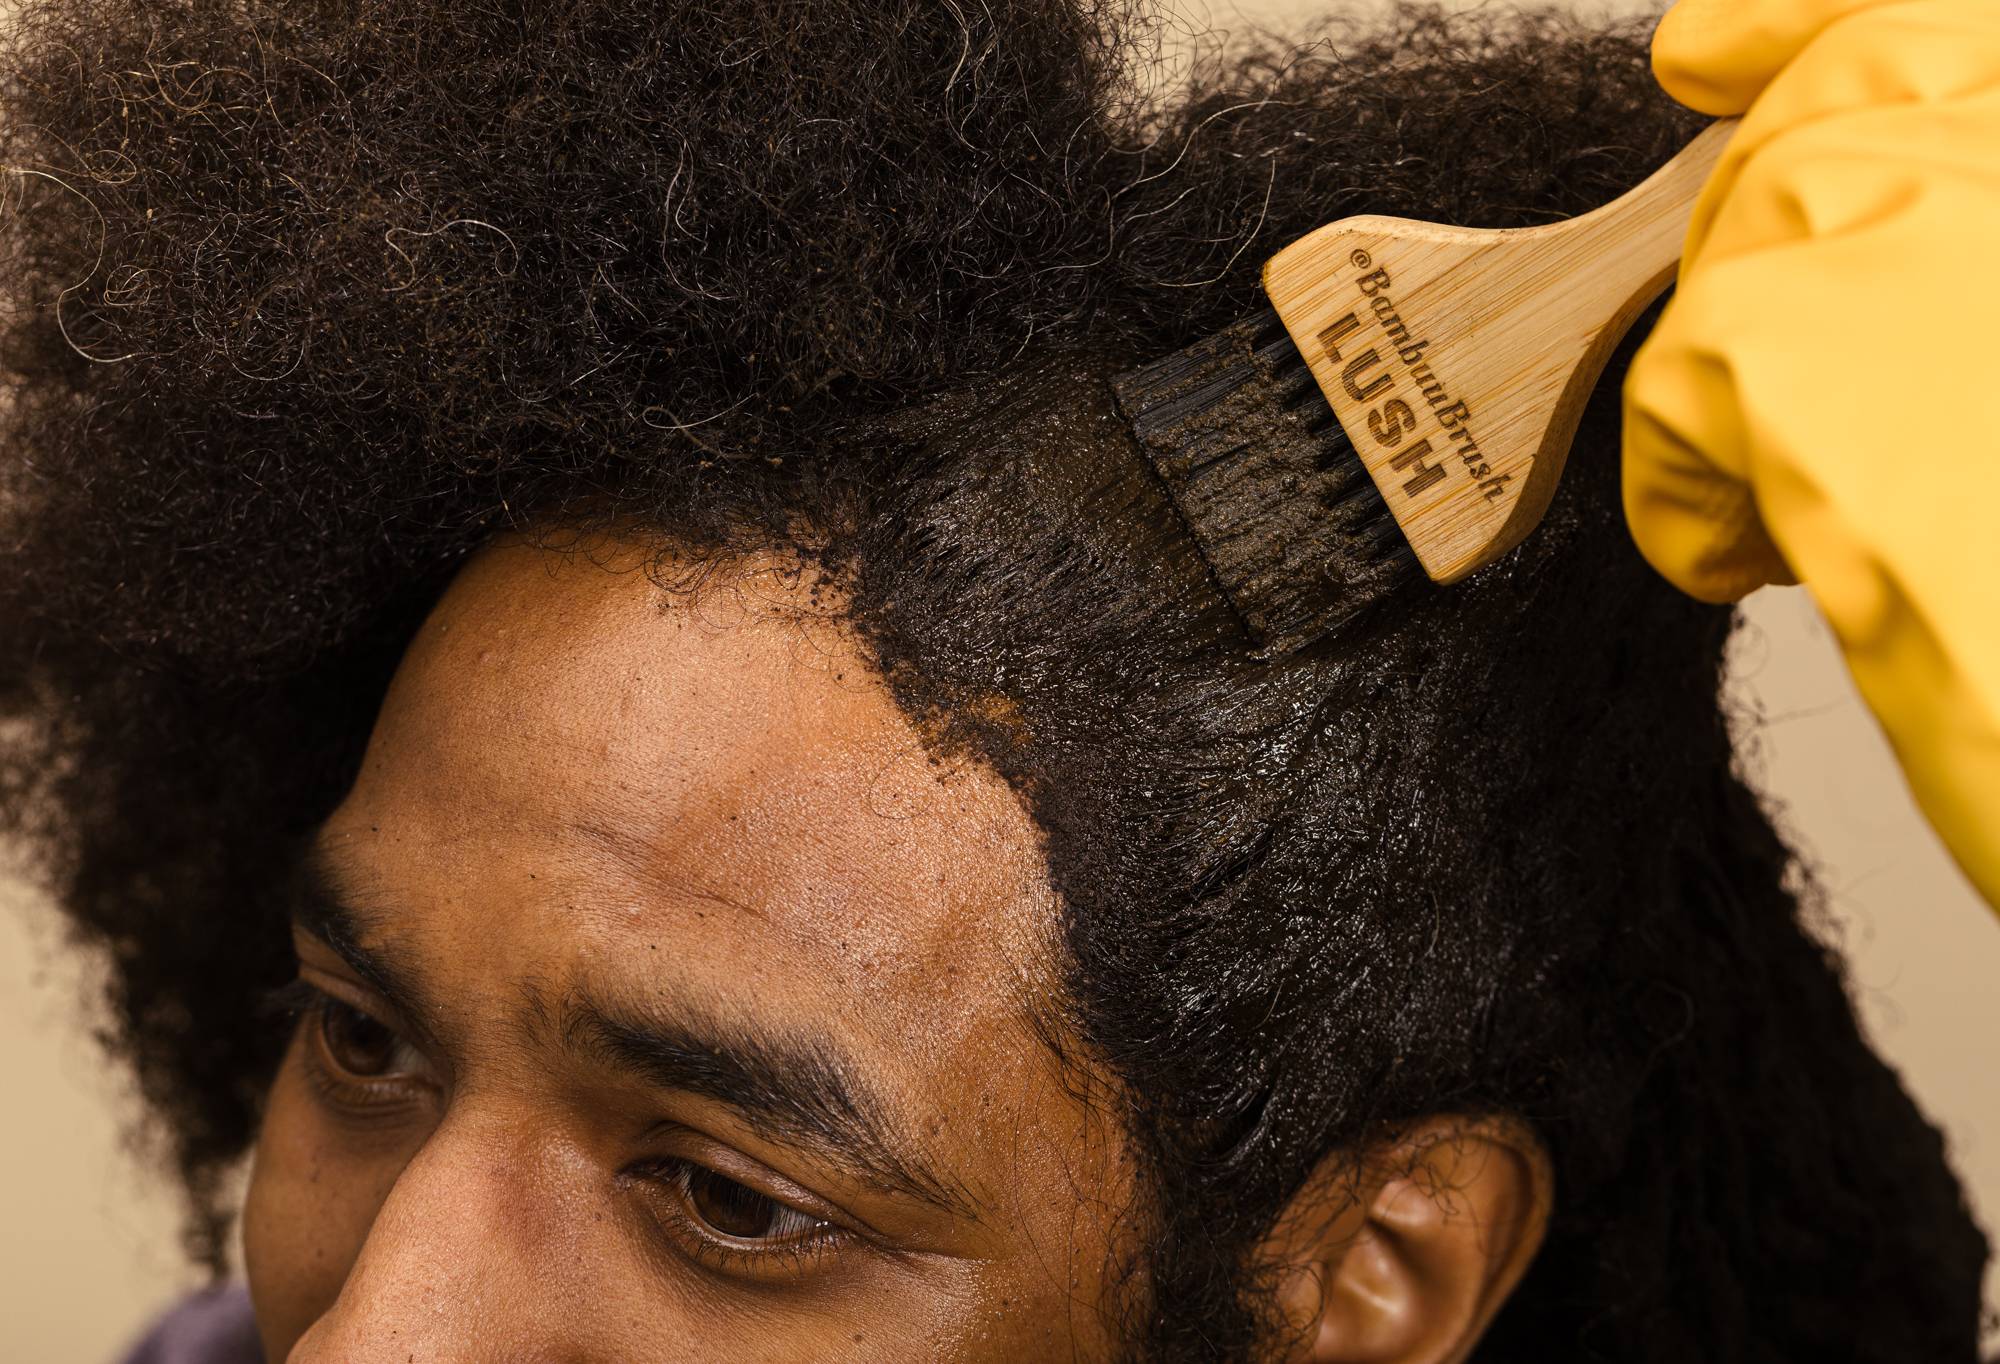 The brush is used to evenly apply fresh henna to the hairline of a model's dark afro hair.